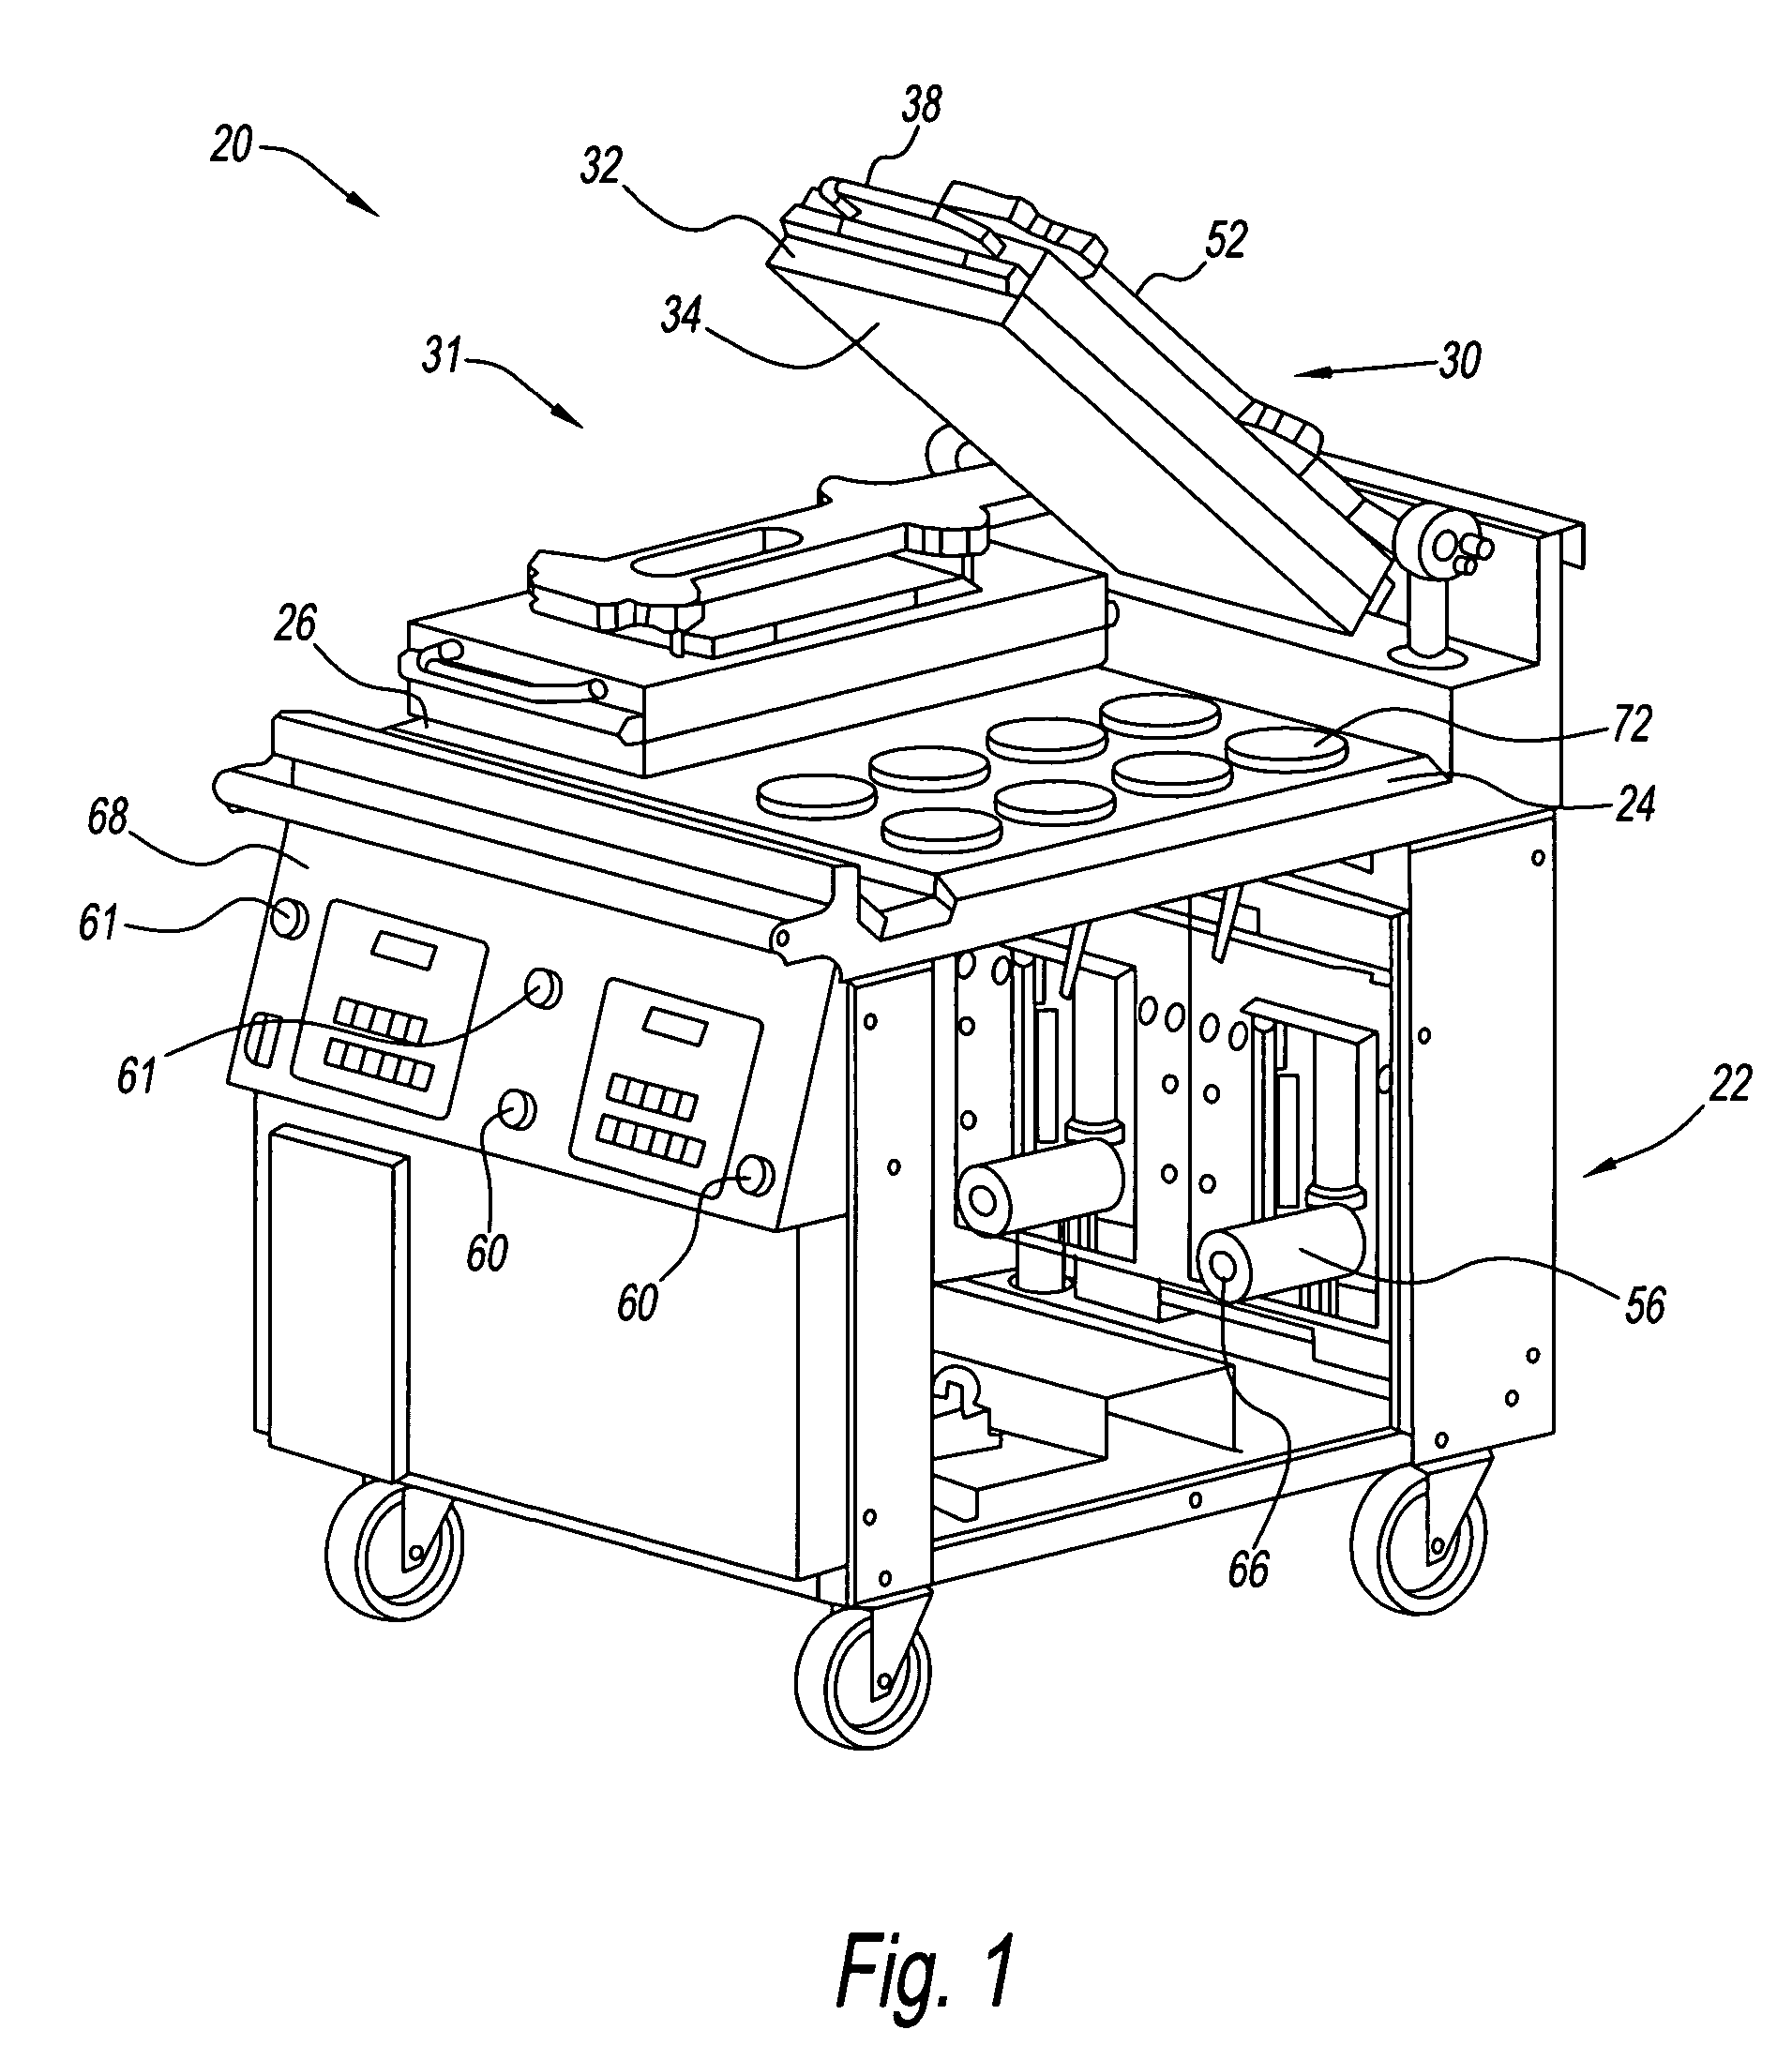 Cooking apparatus and method with product recognition